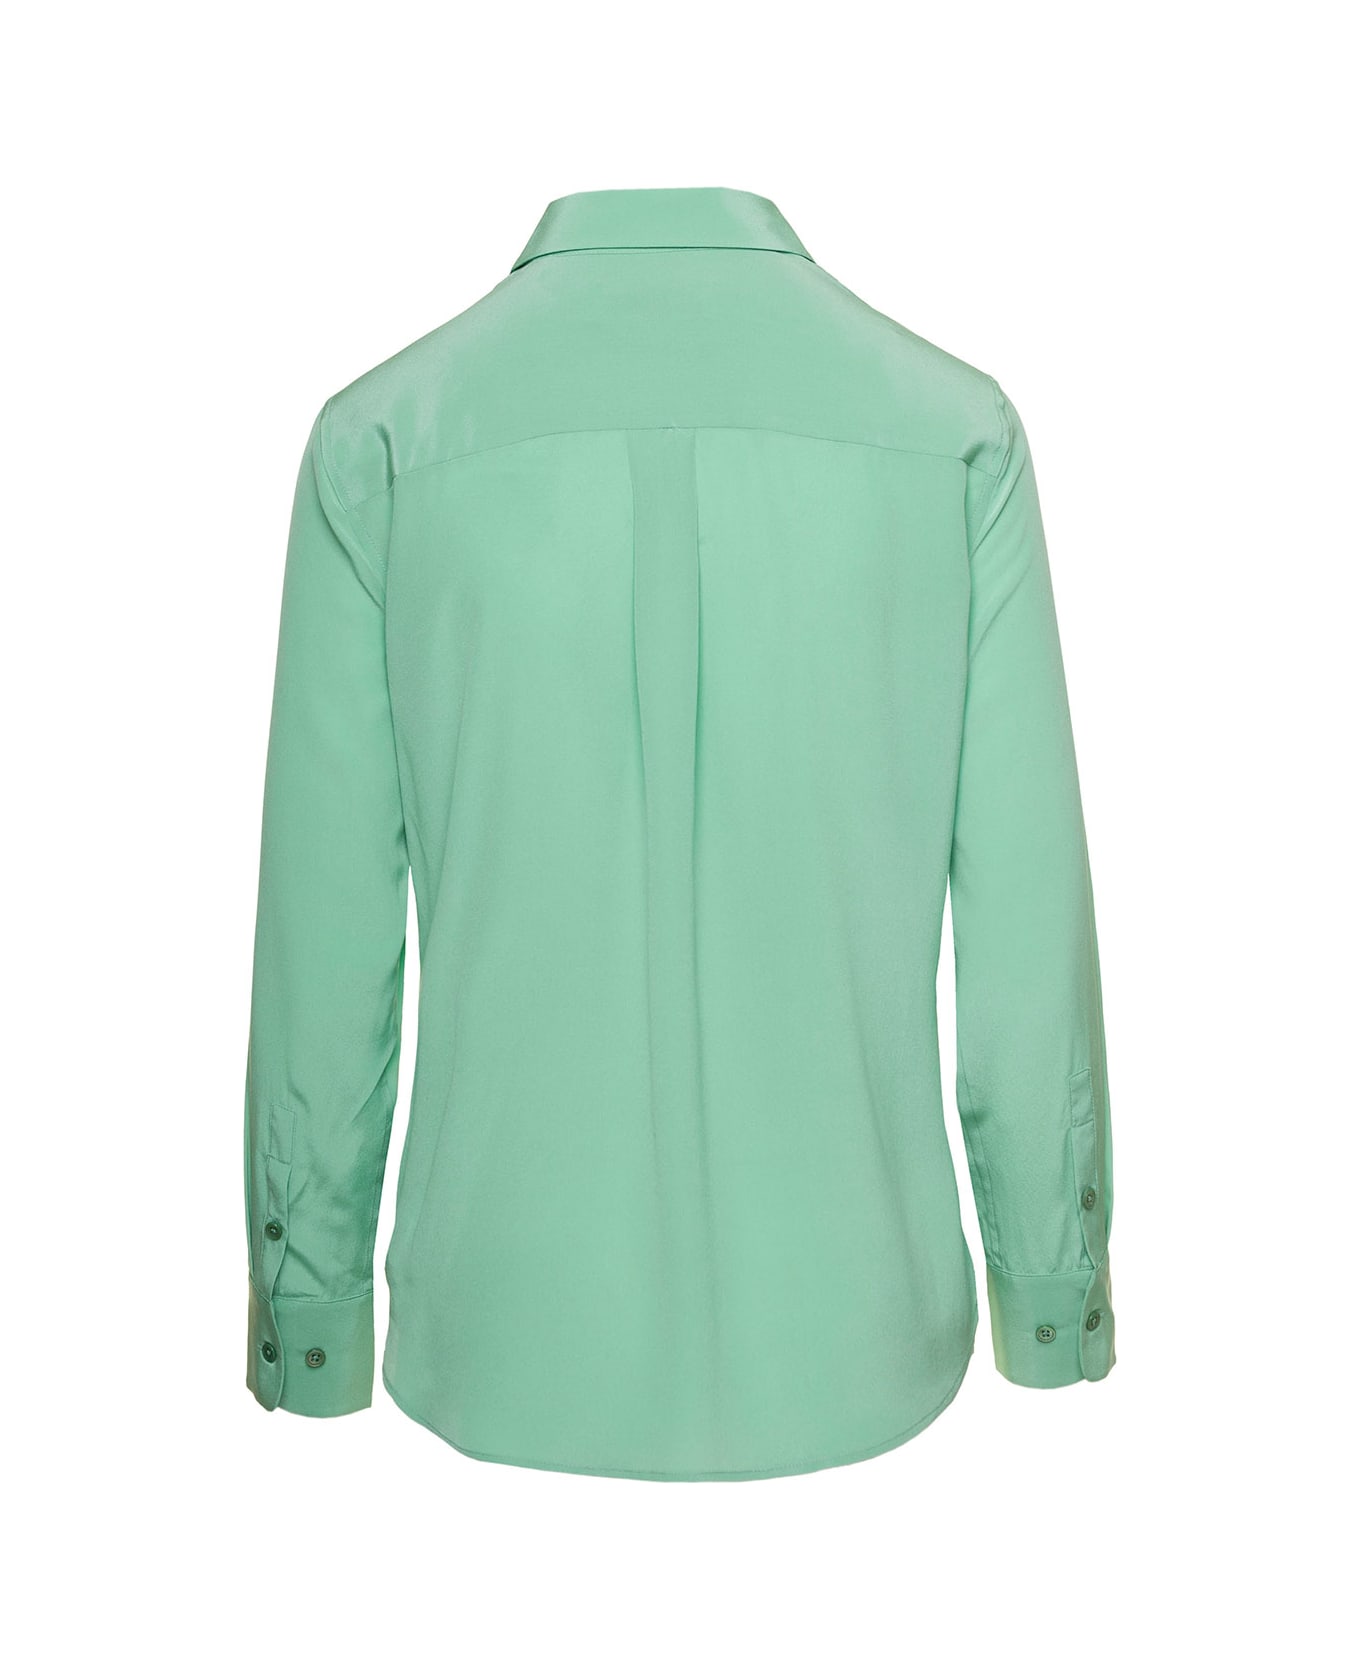 Equipment Mint Green Shirt With Patch Pockets With Flap In Silk Woman - Creme De Menthe シャツ